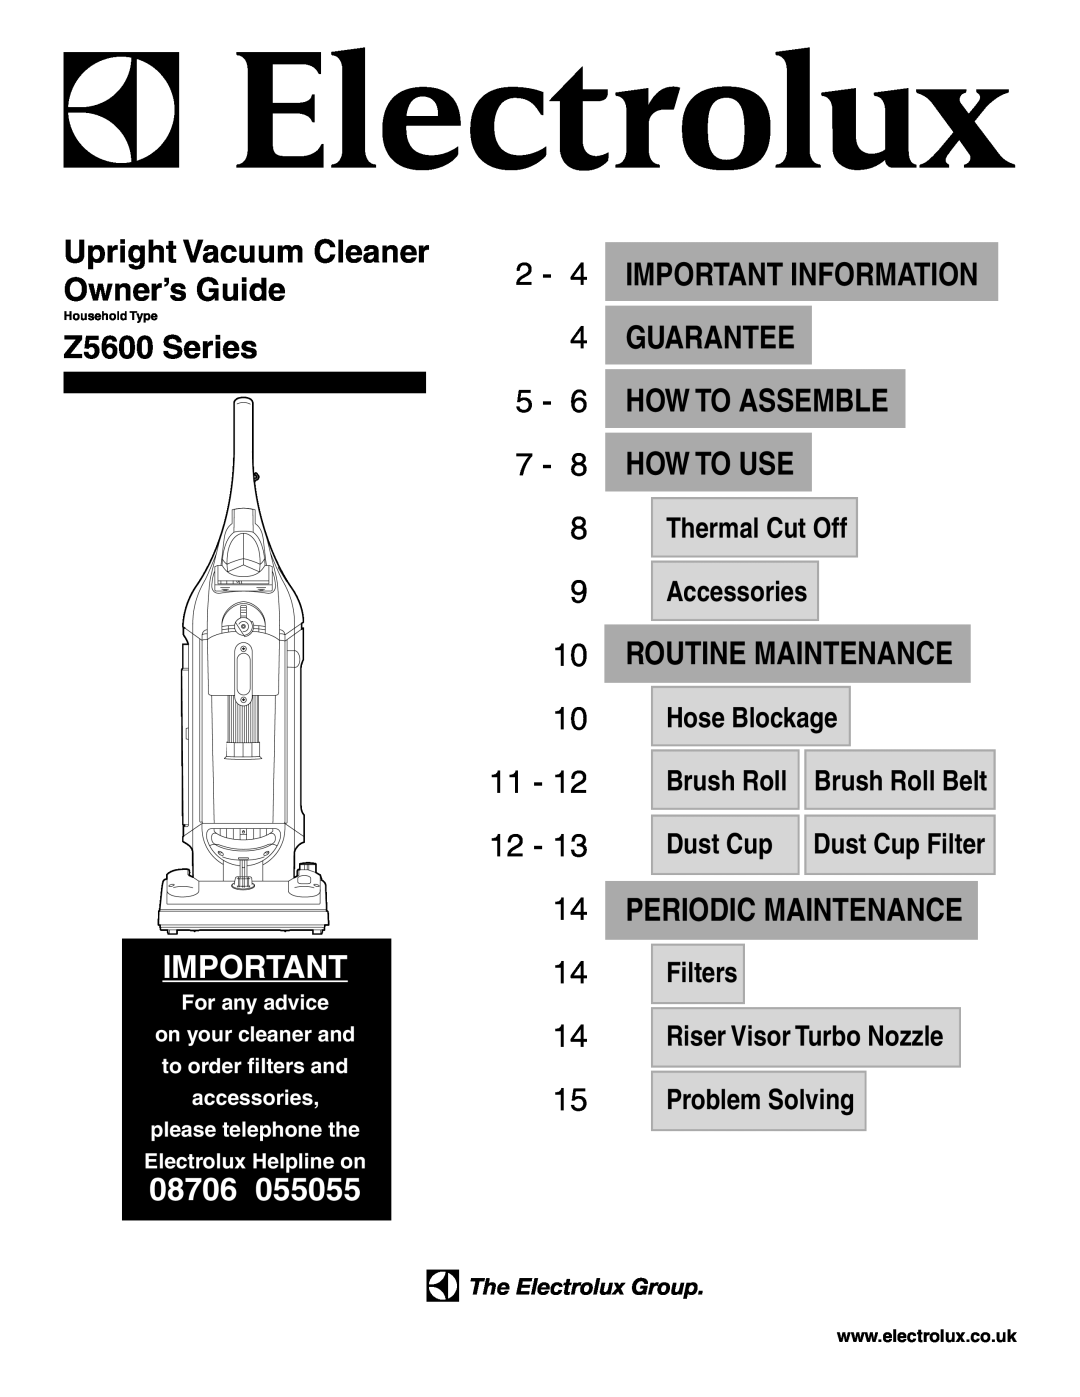 Electrolux Z5600 Series manual Upright Vacuum Cleaner Owner’s Guide, 7 - 8 HOW TO USE, Routine Maintenance, Hose Blockage 